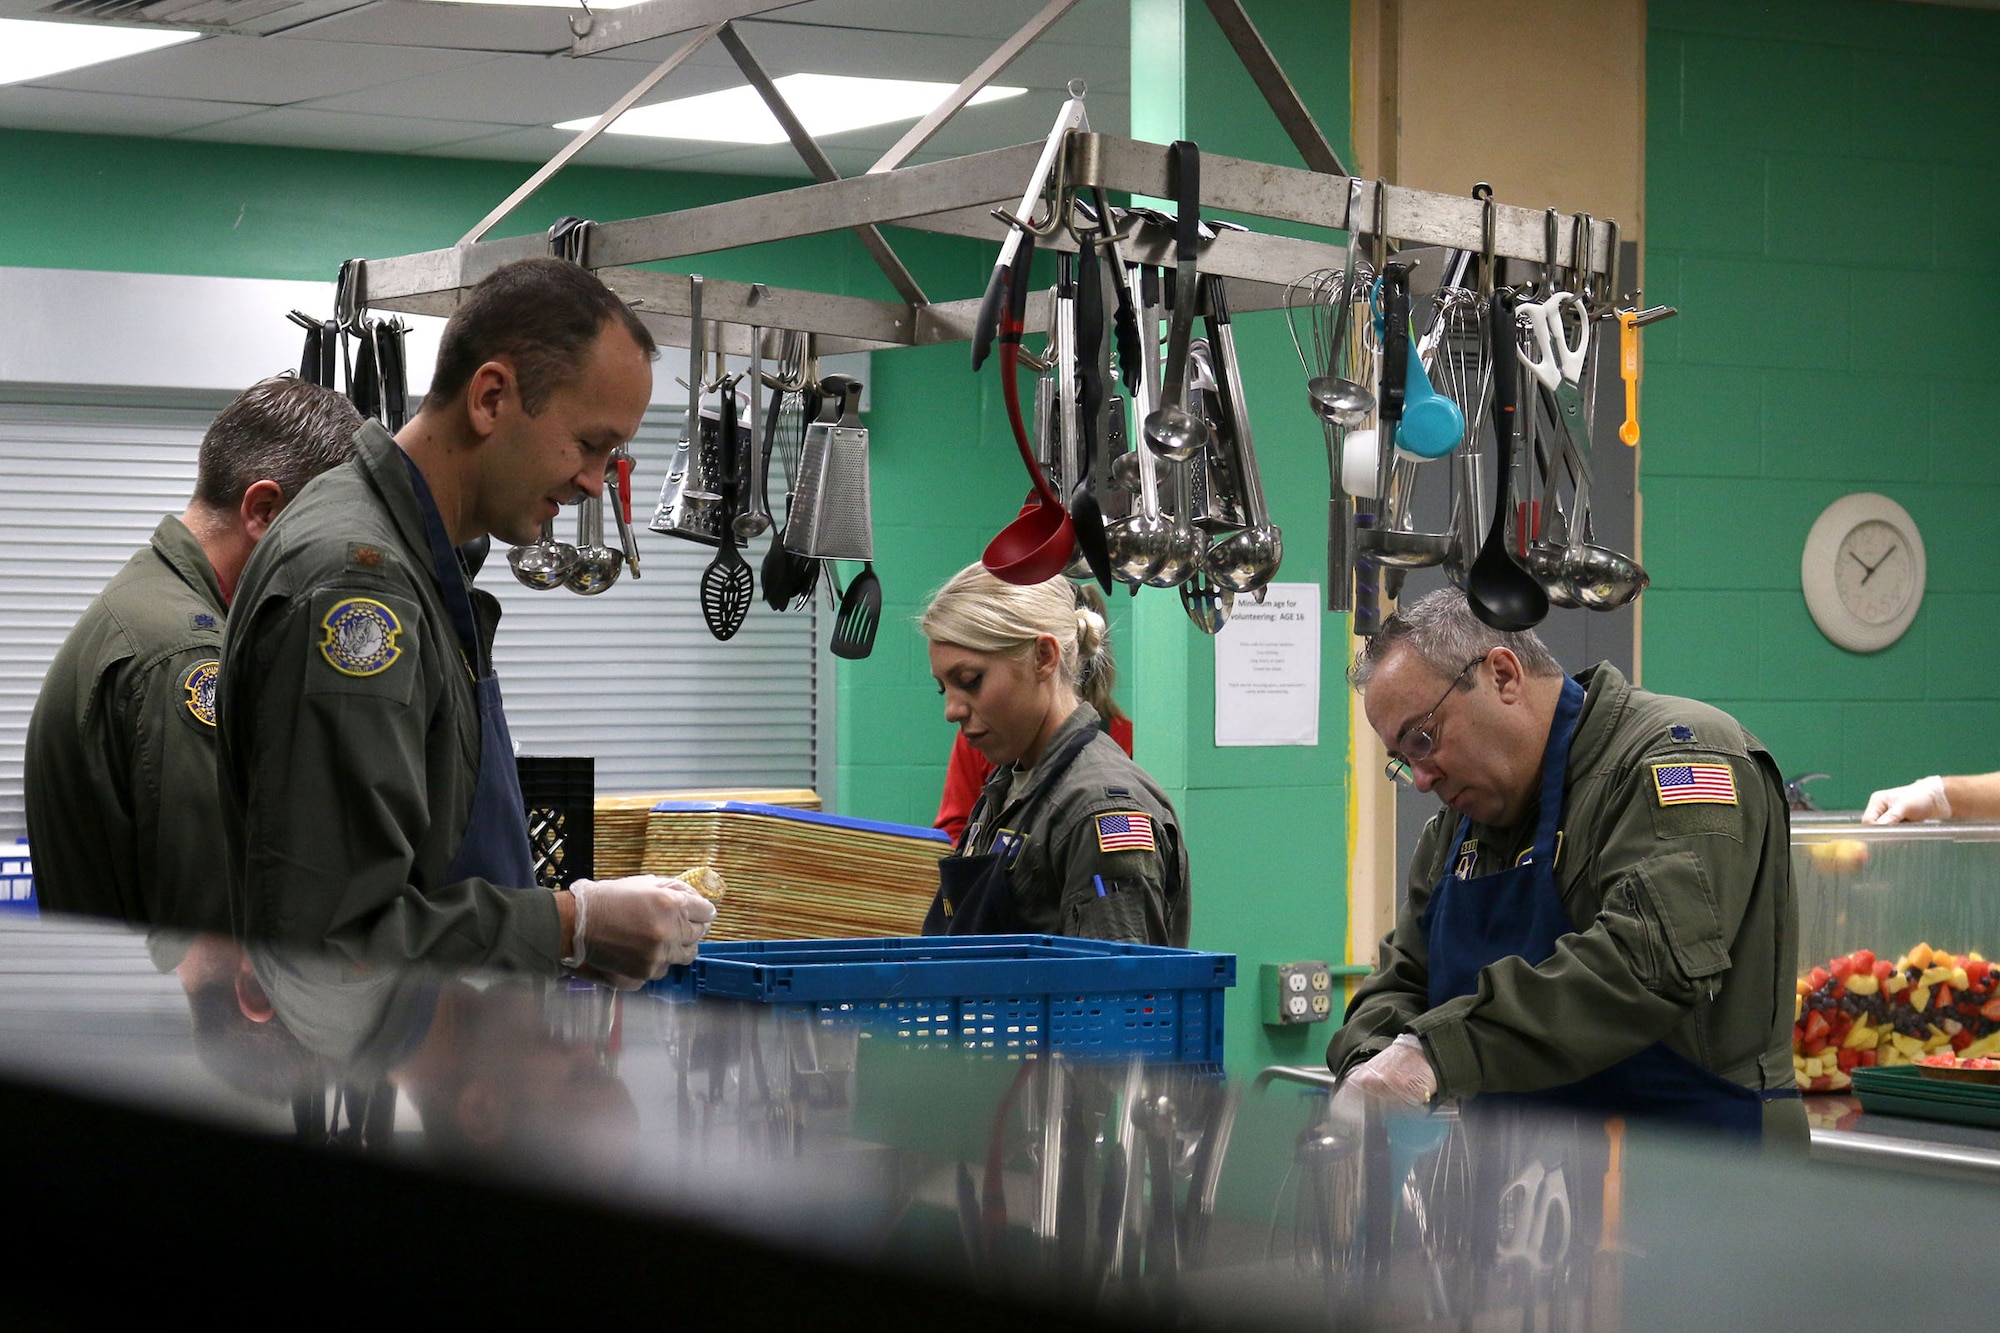 Ten Airmen from the 89th Airlift Squadron volunteer at the House of Bread, Dayton, Ohio, Dec. 8, 2019. The House of Bread serves nearly 250 people a day. (U.S. Air Force photo/Staff Sgt. Joel McCullough)